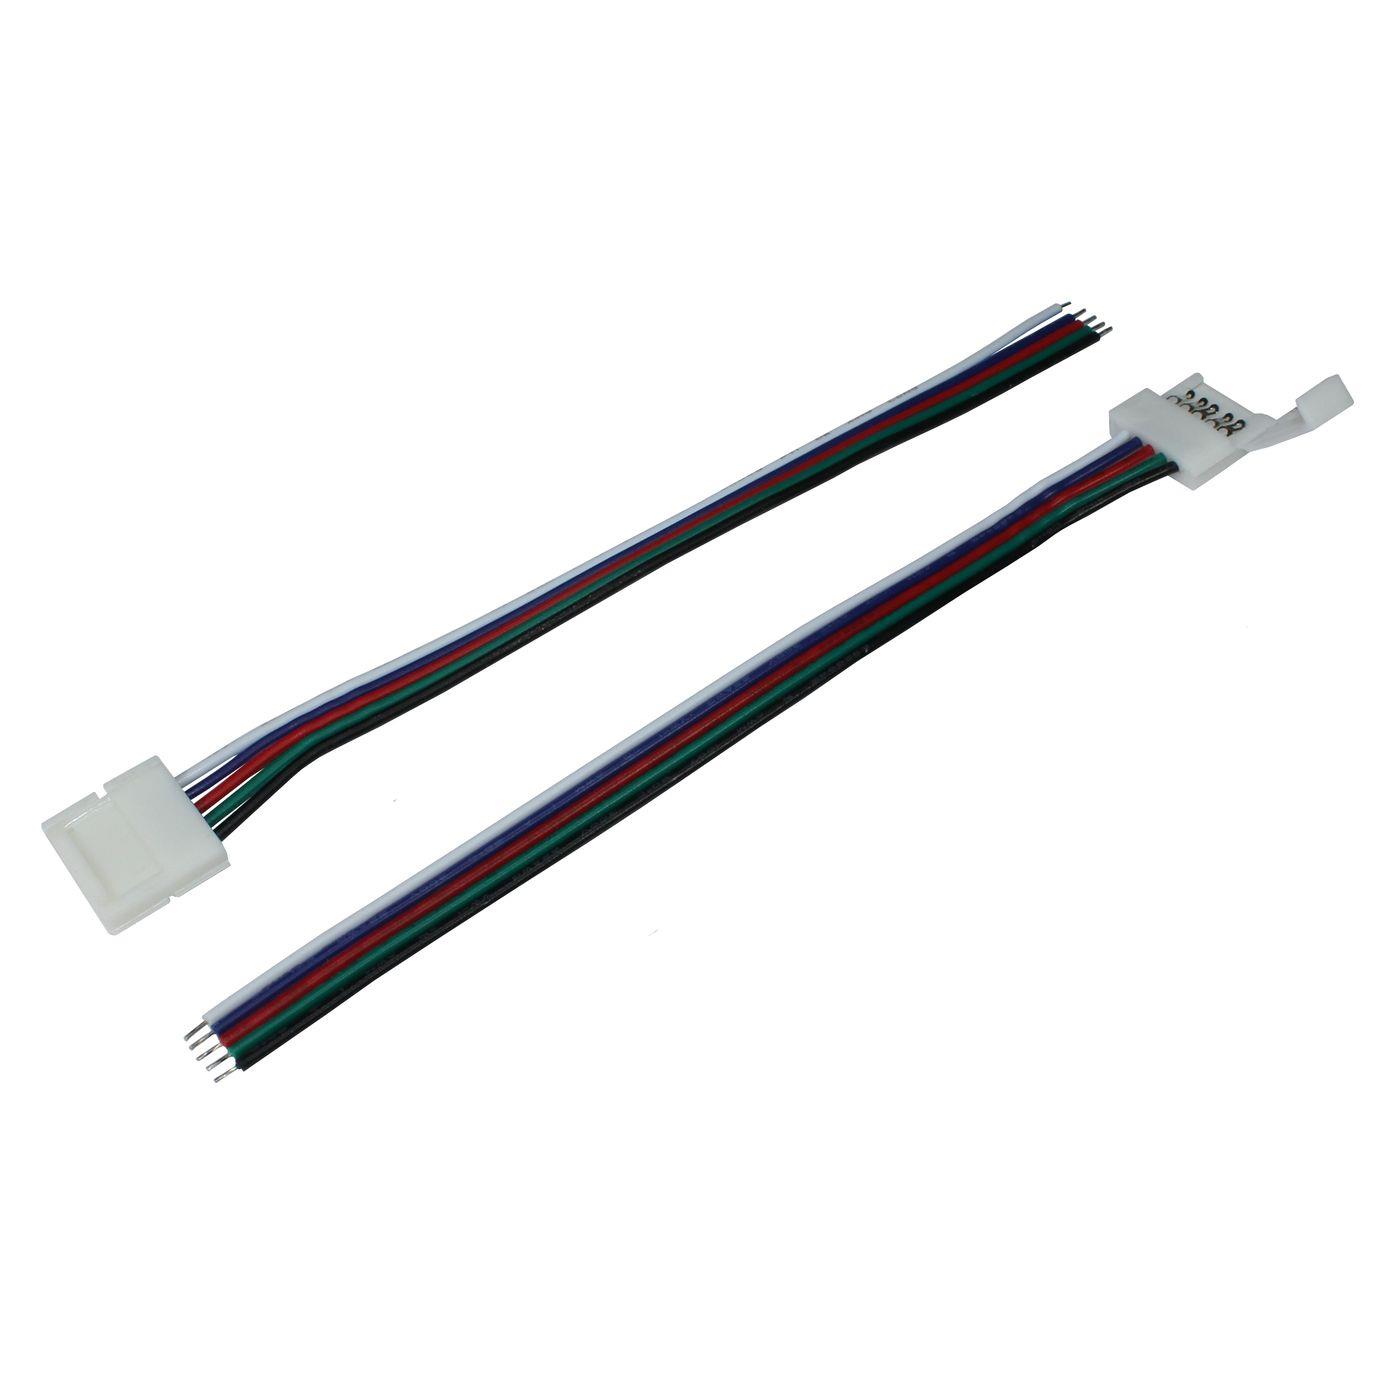 15cm RGBW LED Clip Connector with Cable for 12mm RGBW LED Strip 17x5mm